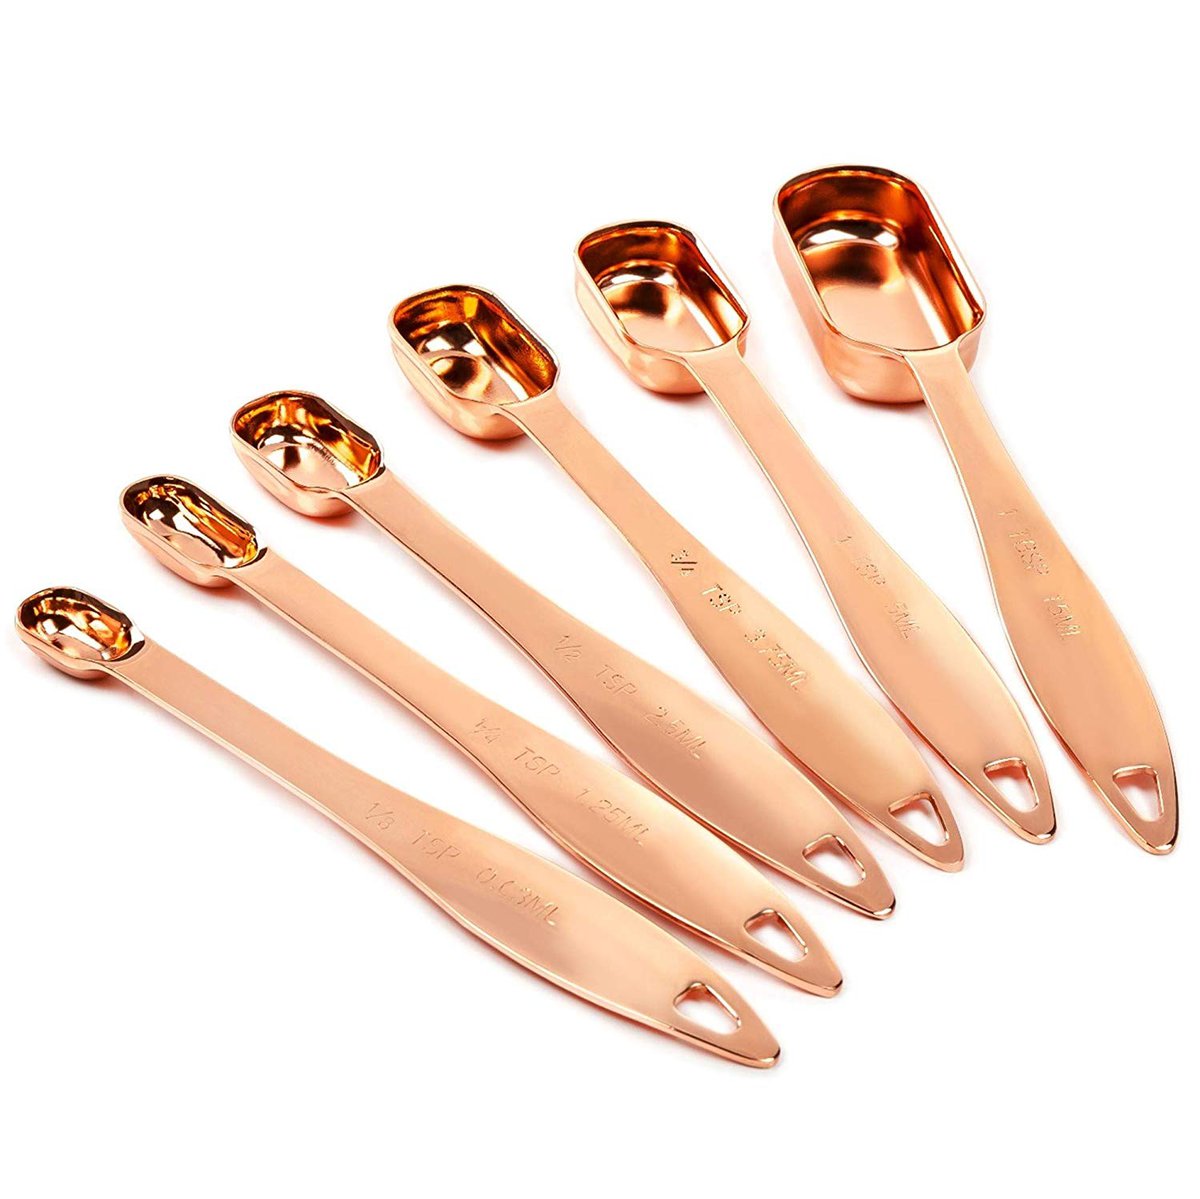 Beautiful and Affordable Copper Kitchen Essentials from Amazon! If you are looking to add a bit of color and interest to your kitchen there is no better way to do it than to add touches of copper. This metal adds old world charm and a cozy touch to any space, no matter what your design is. I've found some of the loveliest kitchen accessories and essentials on Amazon.